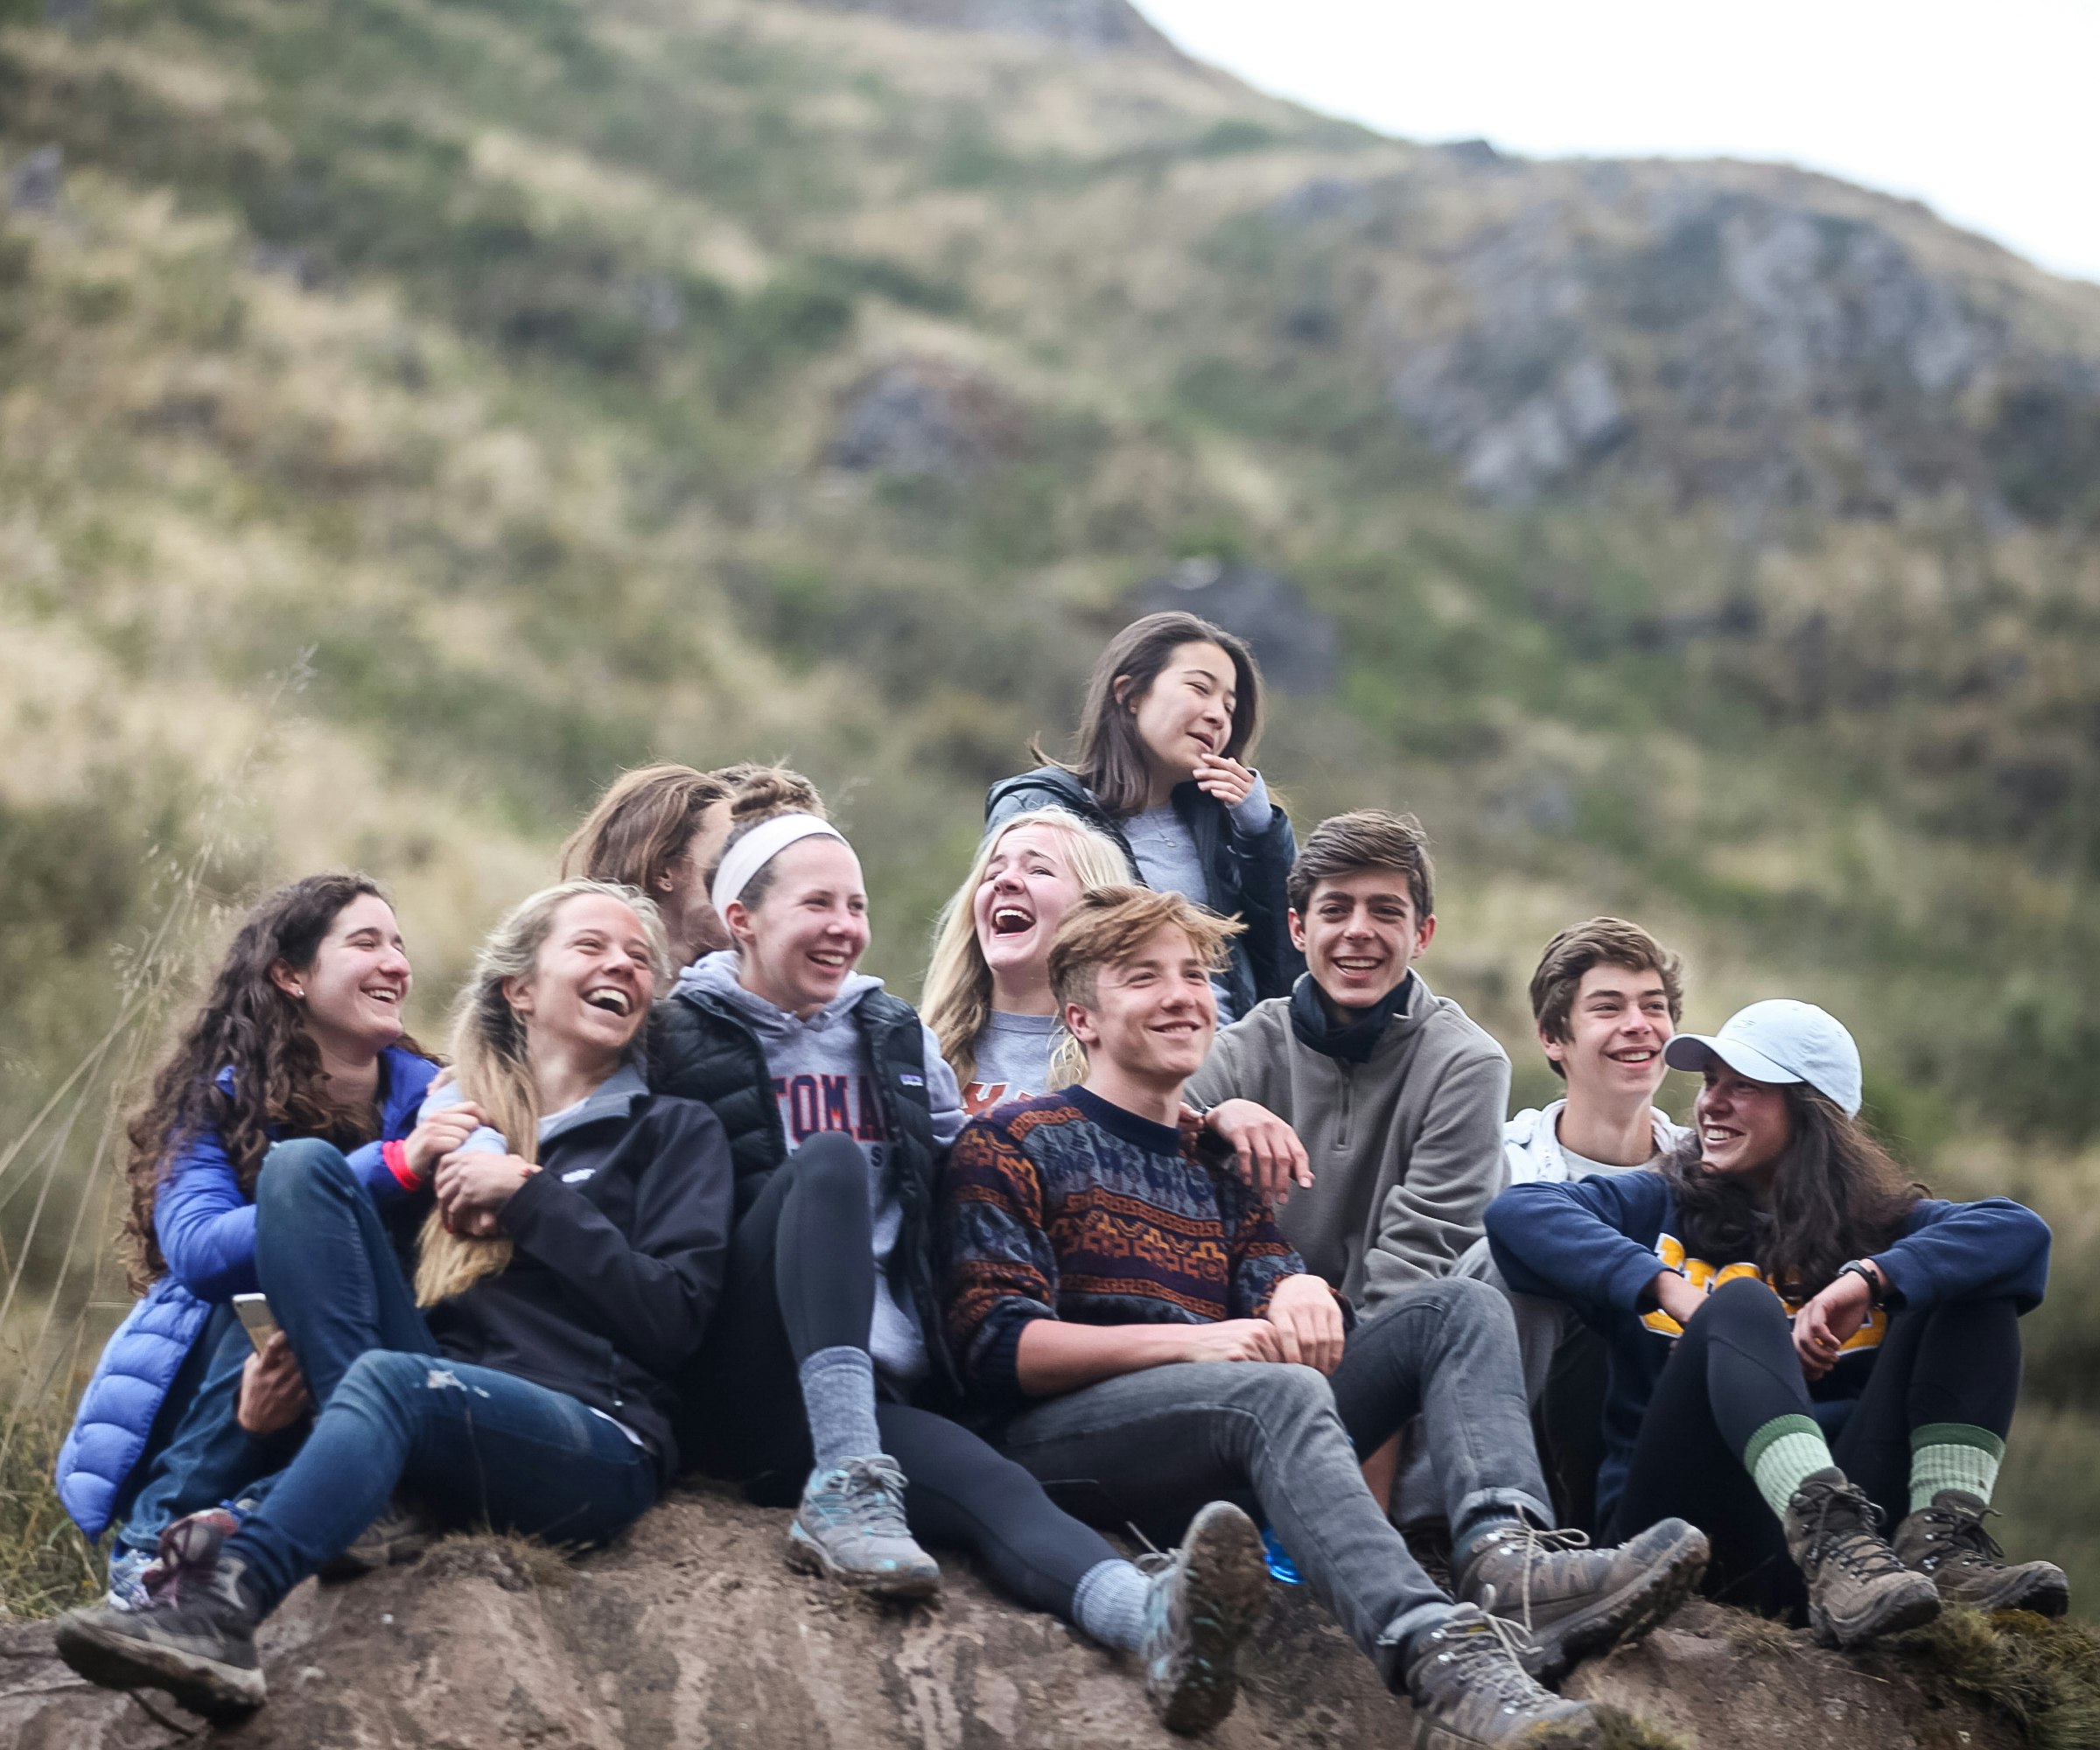 How Students Benefit from Their Travels with Rustic Pathways